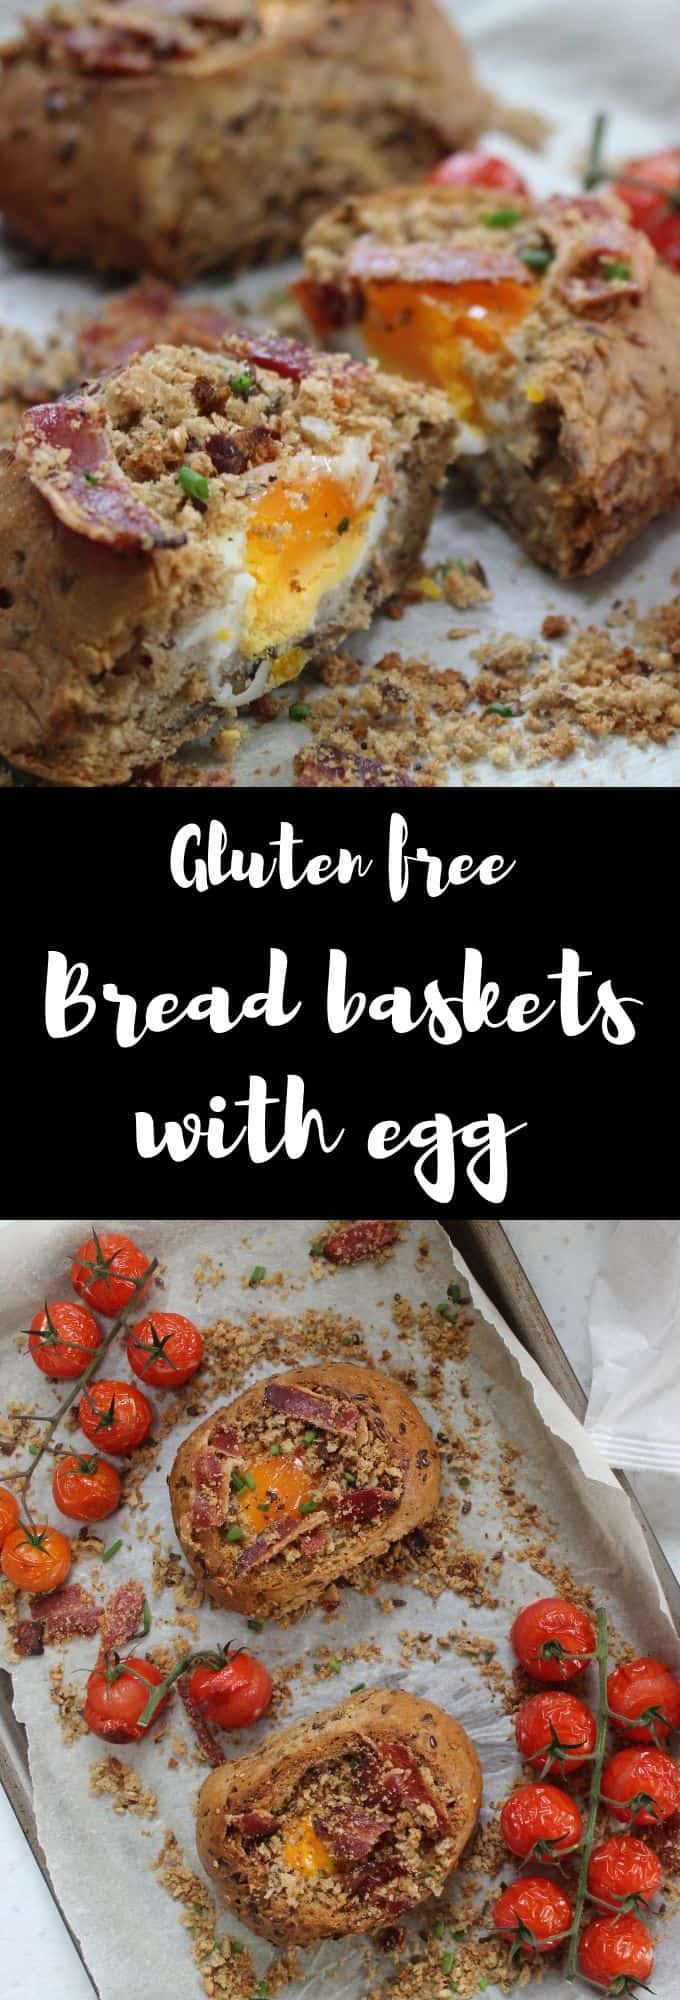 gluten free bread baskets with egg and bacon crumble brunch breakfast recipes